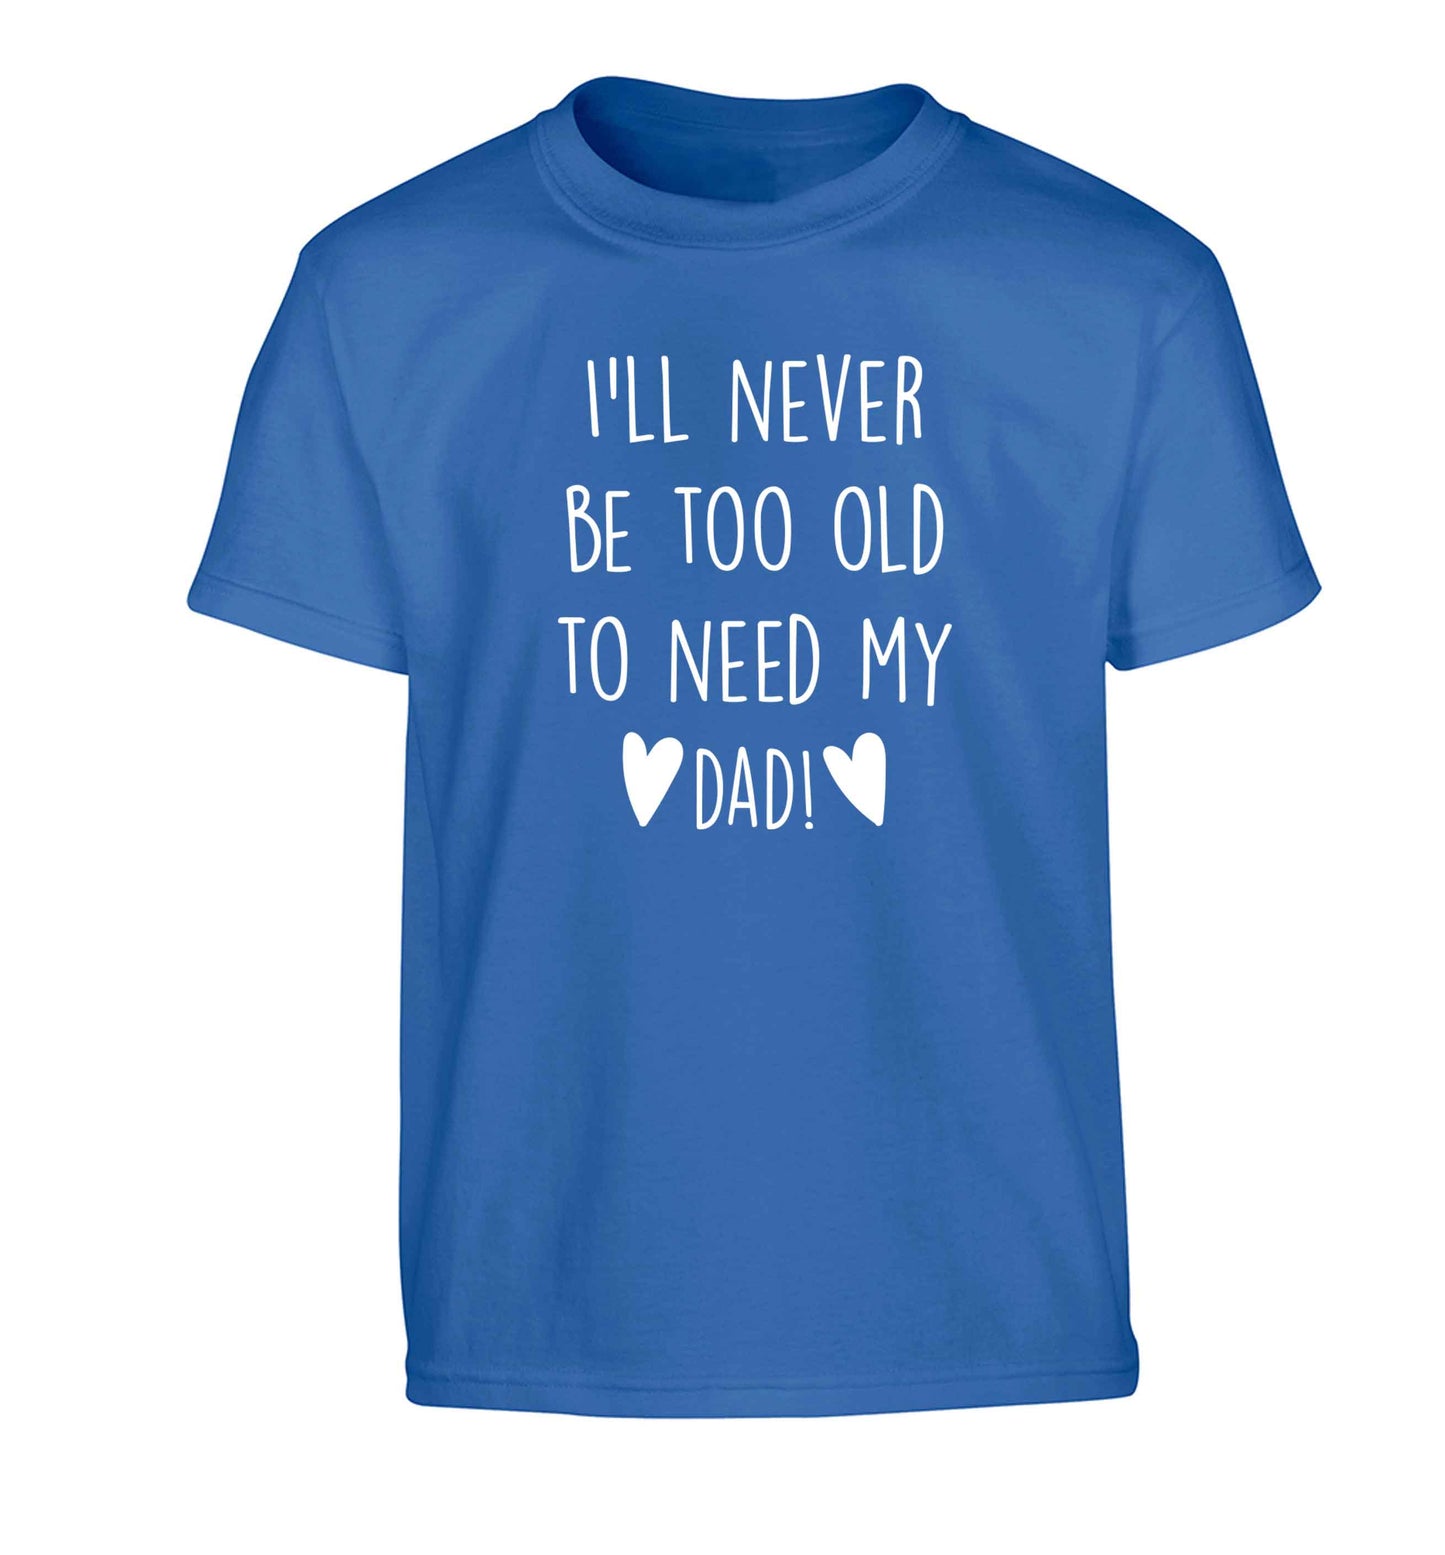 I'll never be too old to need my dad Children's blue Tshirt 12-13 Years